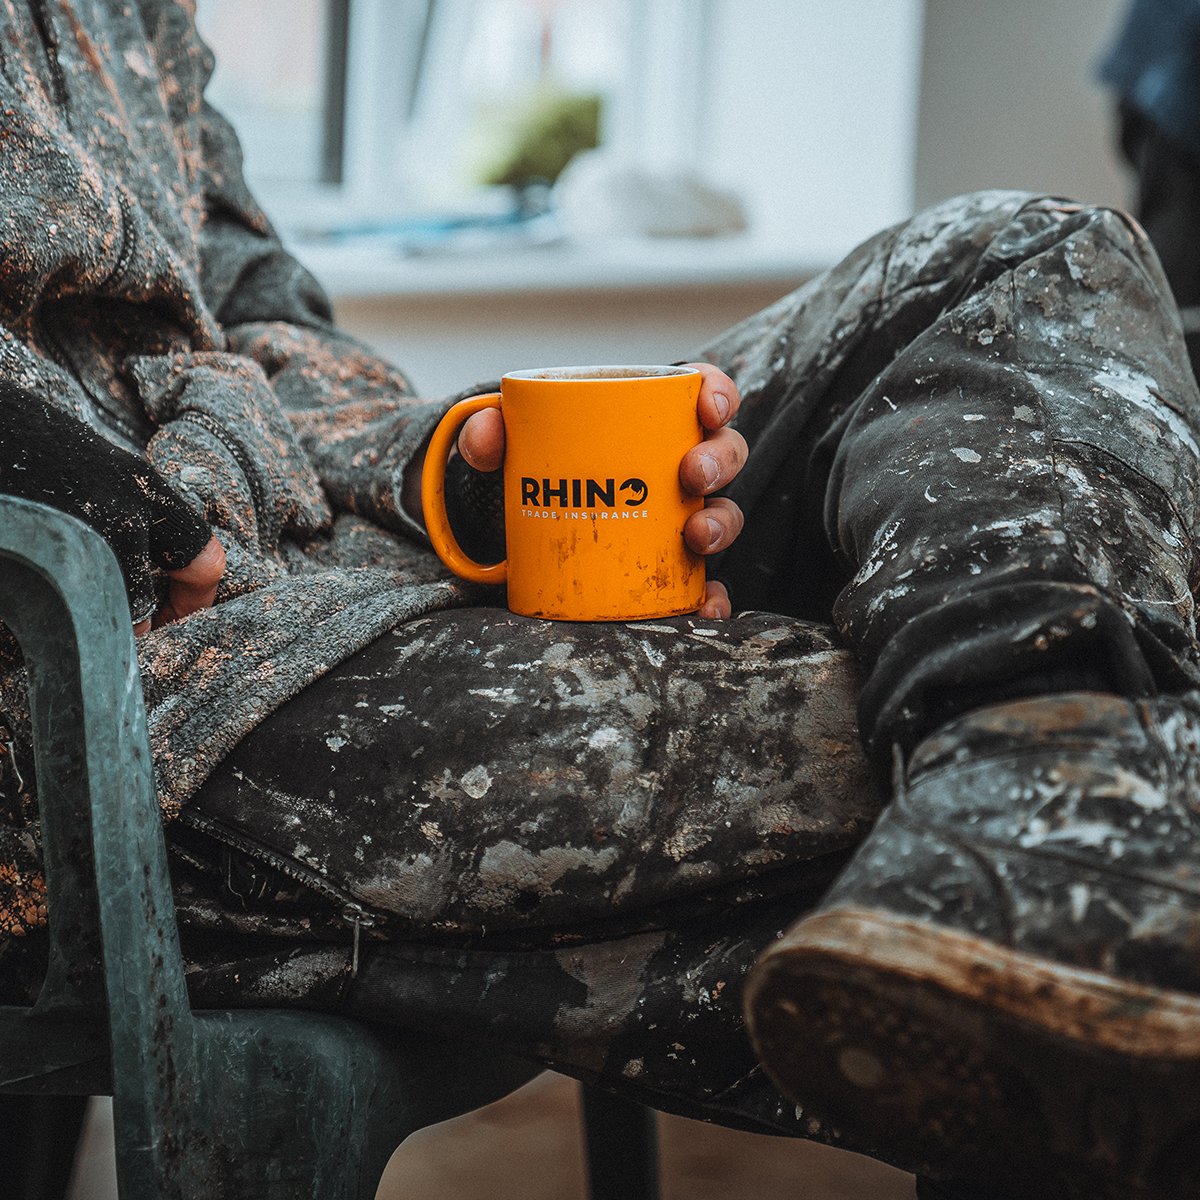 Nothing beats a brew in a Rhino mug! Why not grab yourself a quote during your break, it only takes 60 seconds.

Get your cover here 🦏 rhinotradeinsurance.com/quote/

#tradeinsurance #tradespeople #onsite